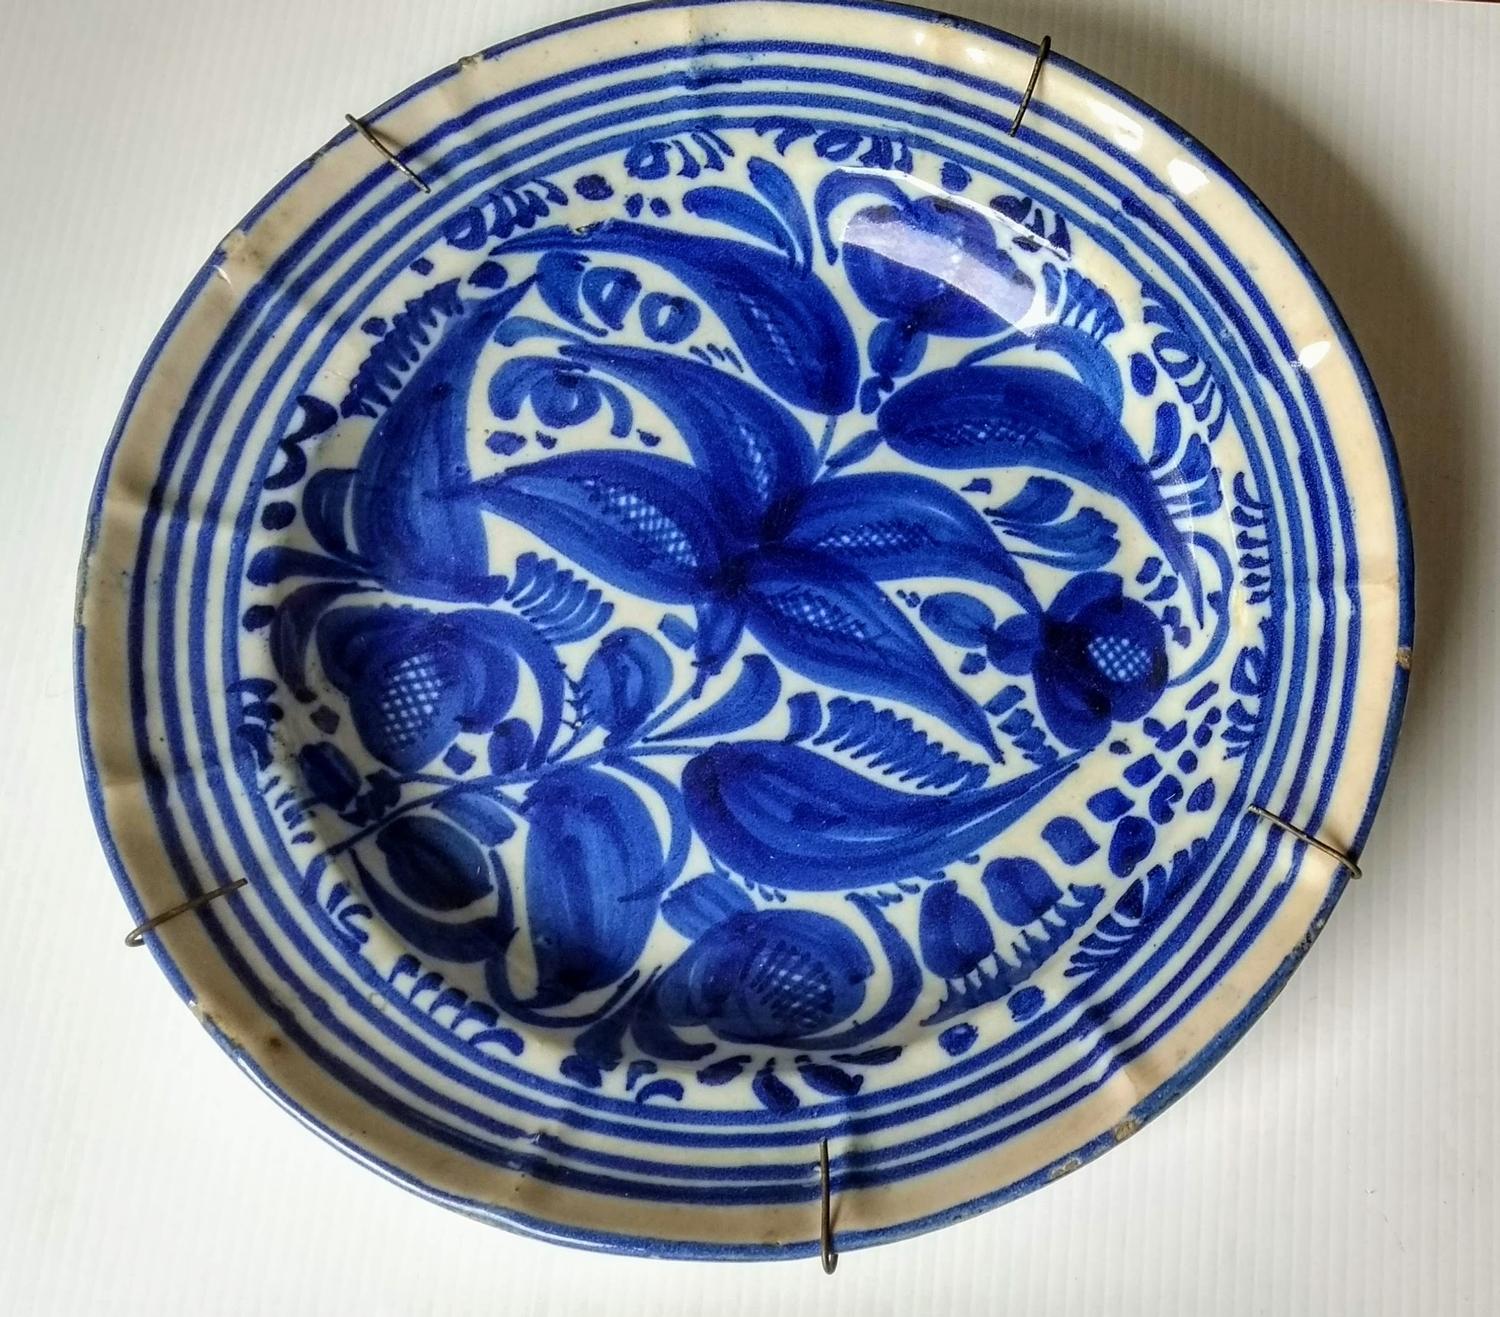 Two 18th century blue and white delft tin plate circular chargers with floral and foliate